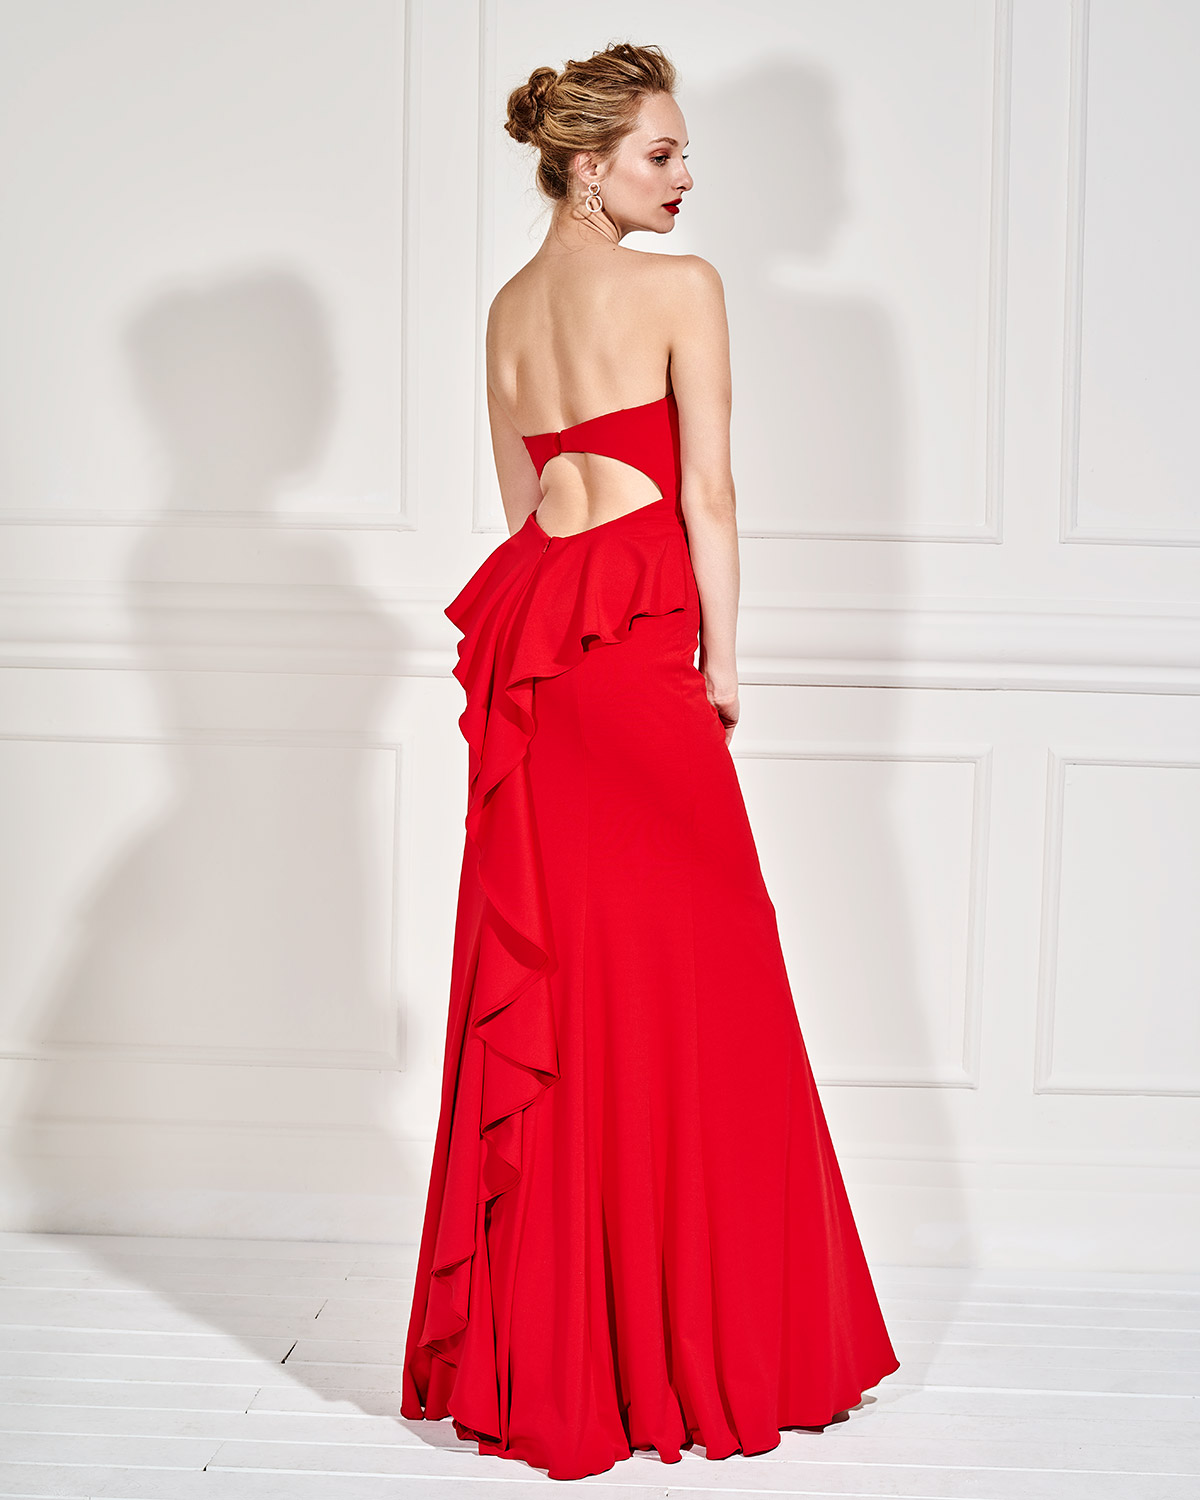 Long strapless evening dress with open back